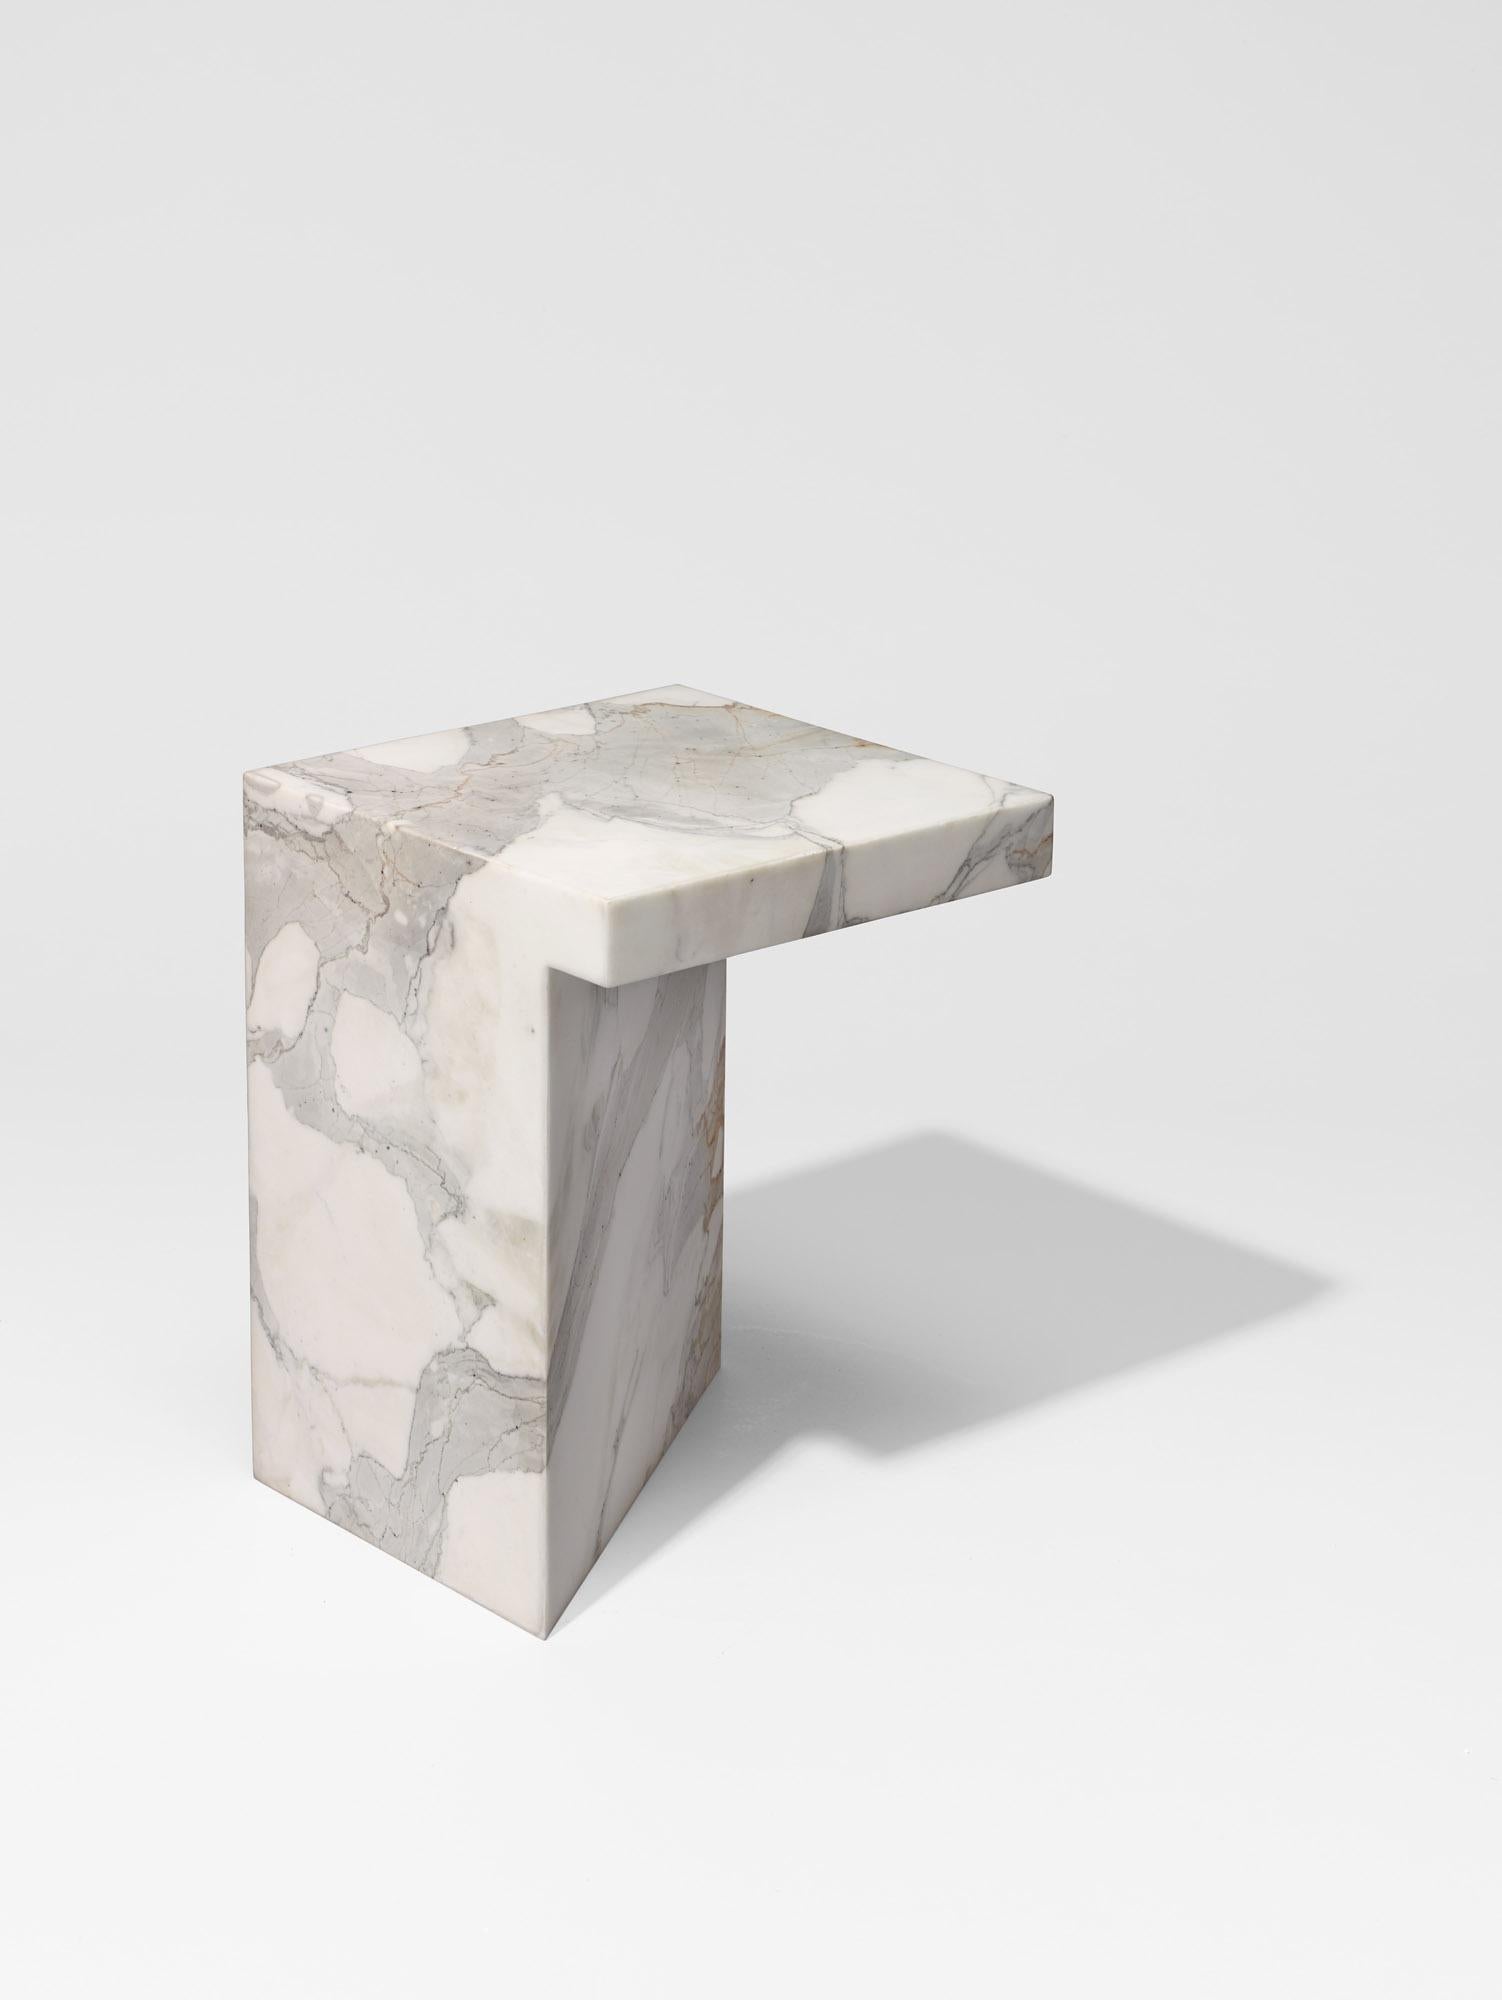 Contemporary Black Marble Side Table Imbalance by Hervé Langlais for Galerie Negropontes For Sale